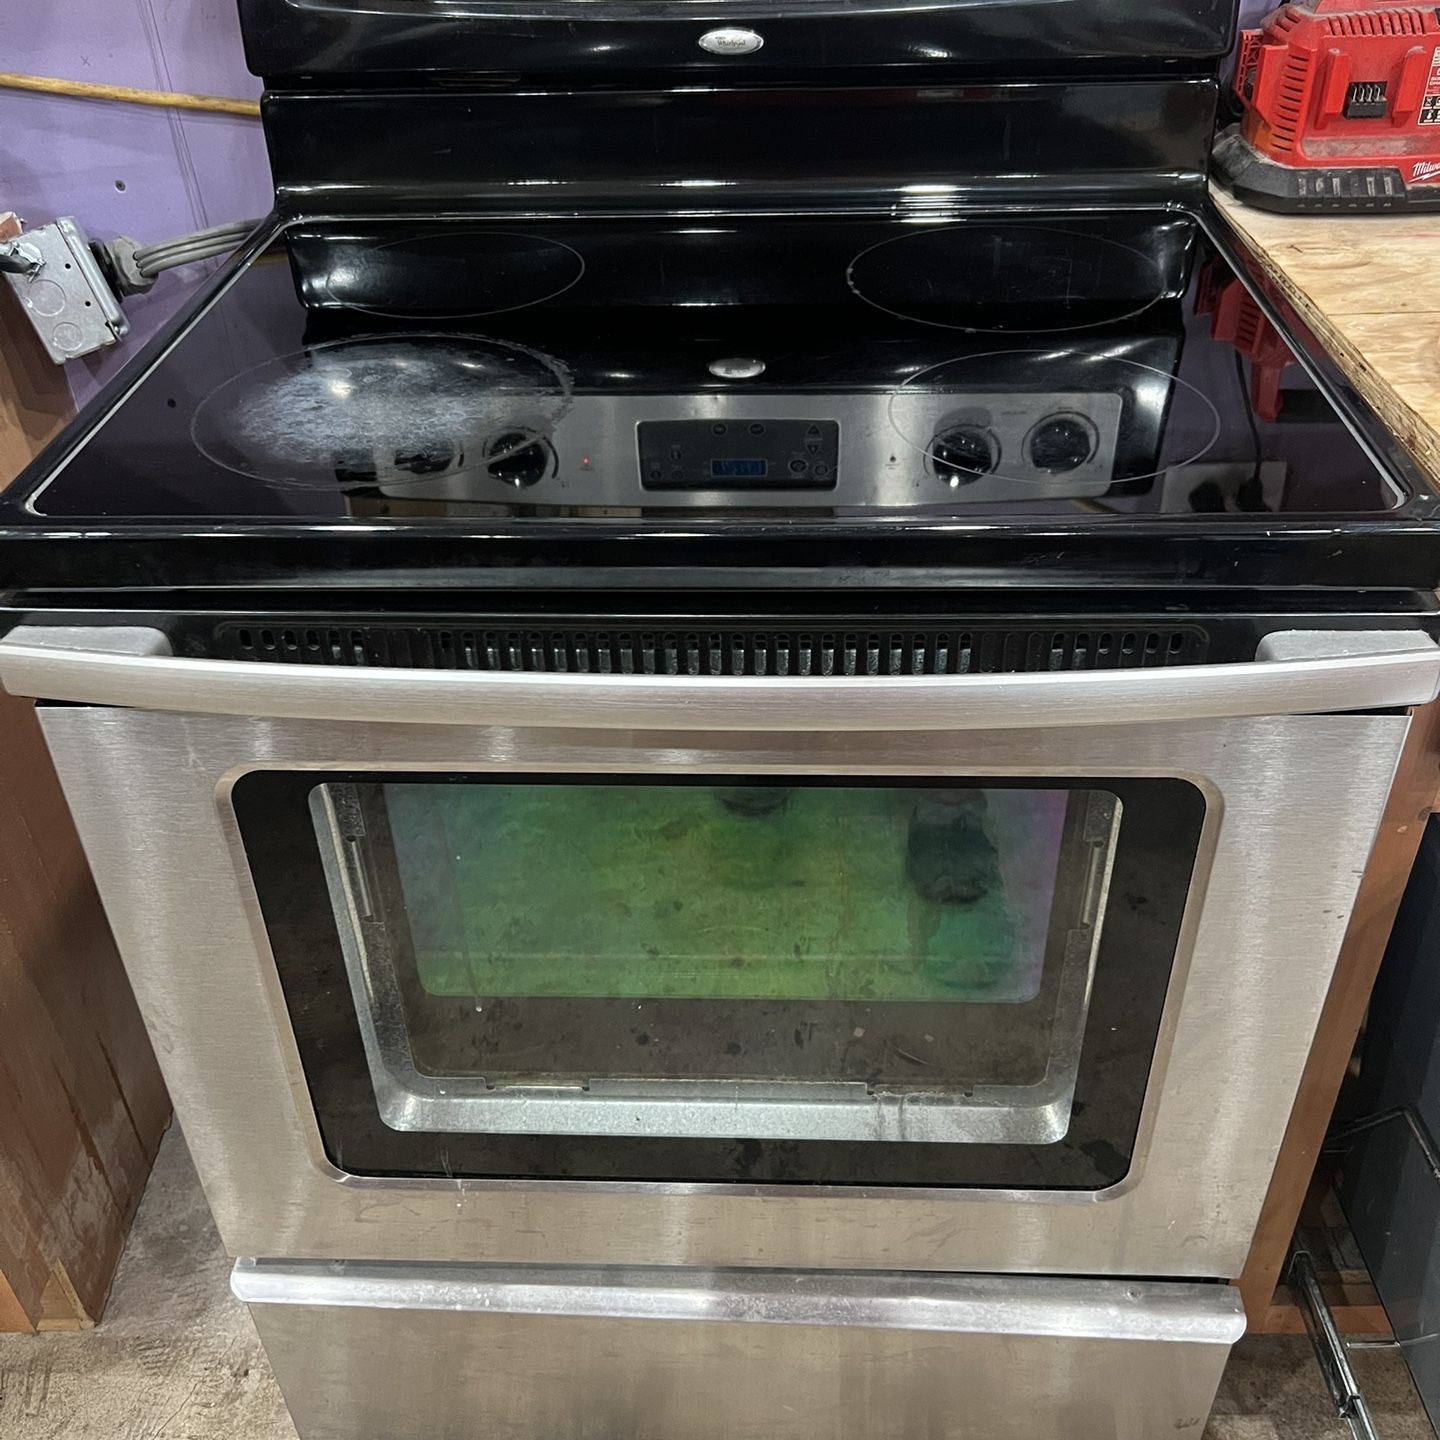 Brand New 2 Burner Whirlpool Stainless Steel Cooktop for Sale in Hialeah,  FL - OfferUp